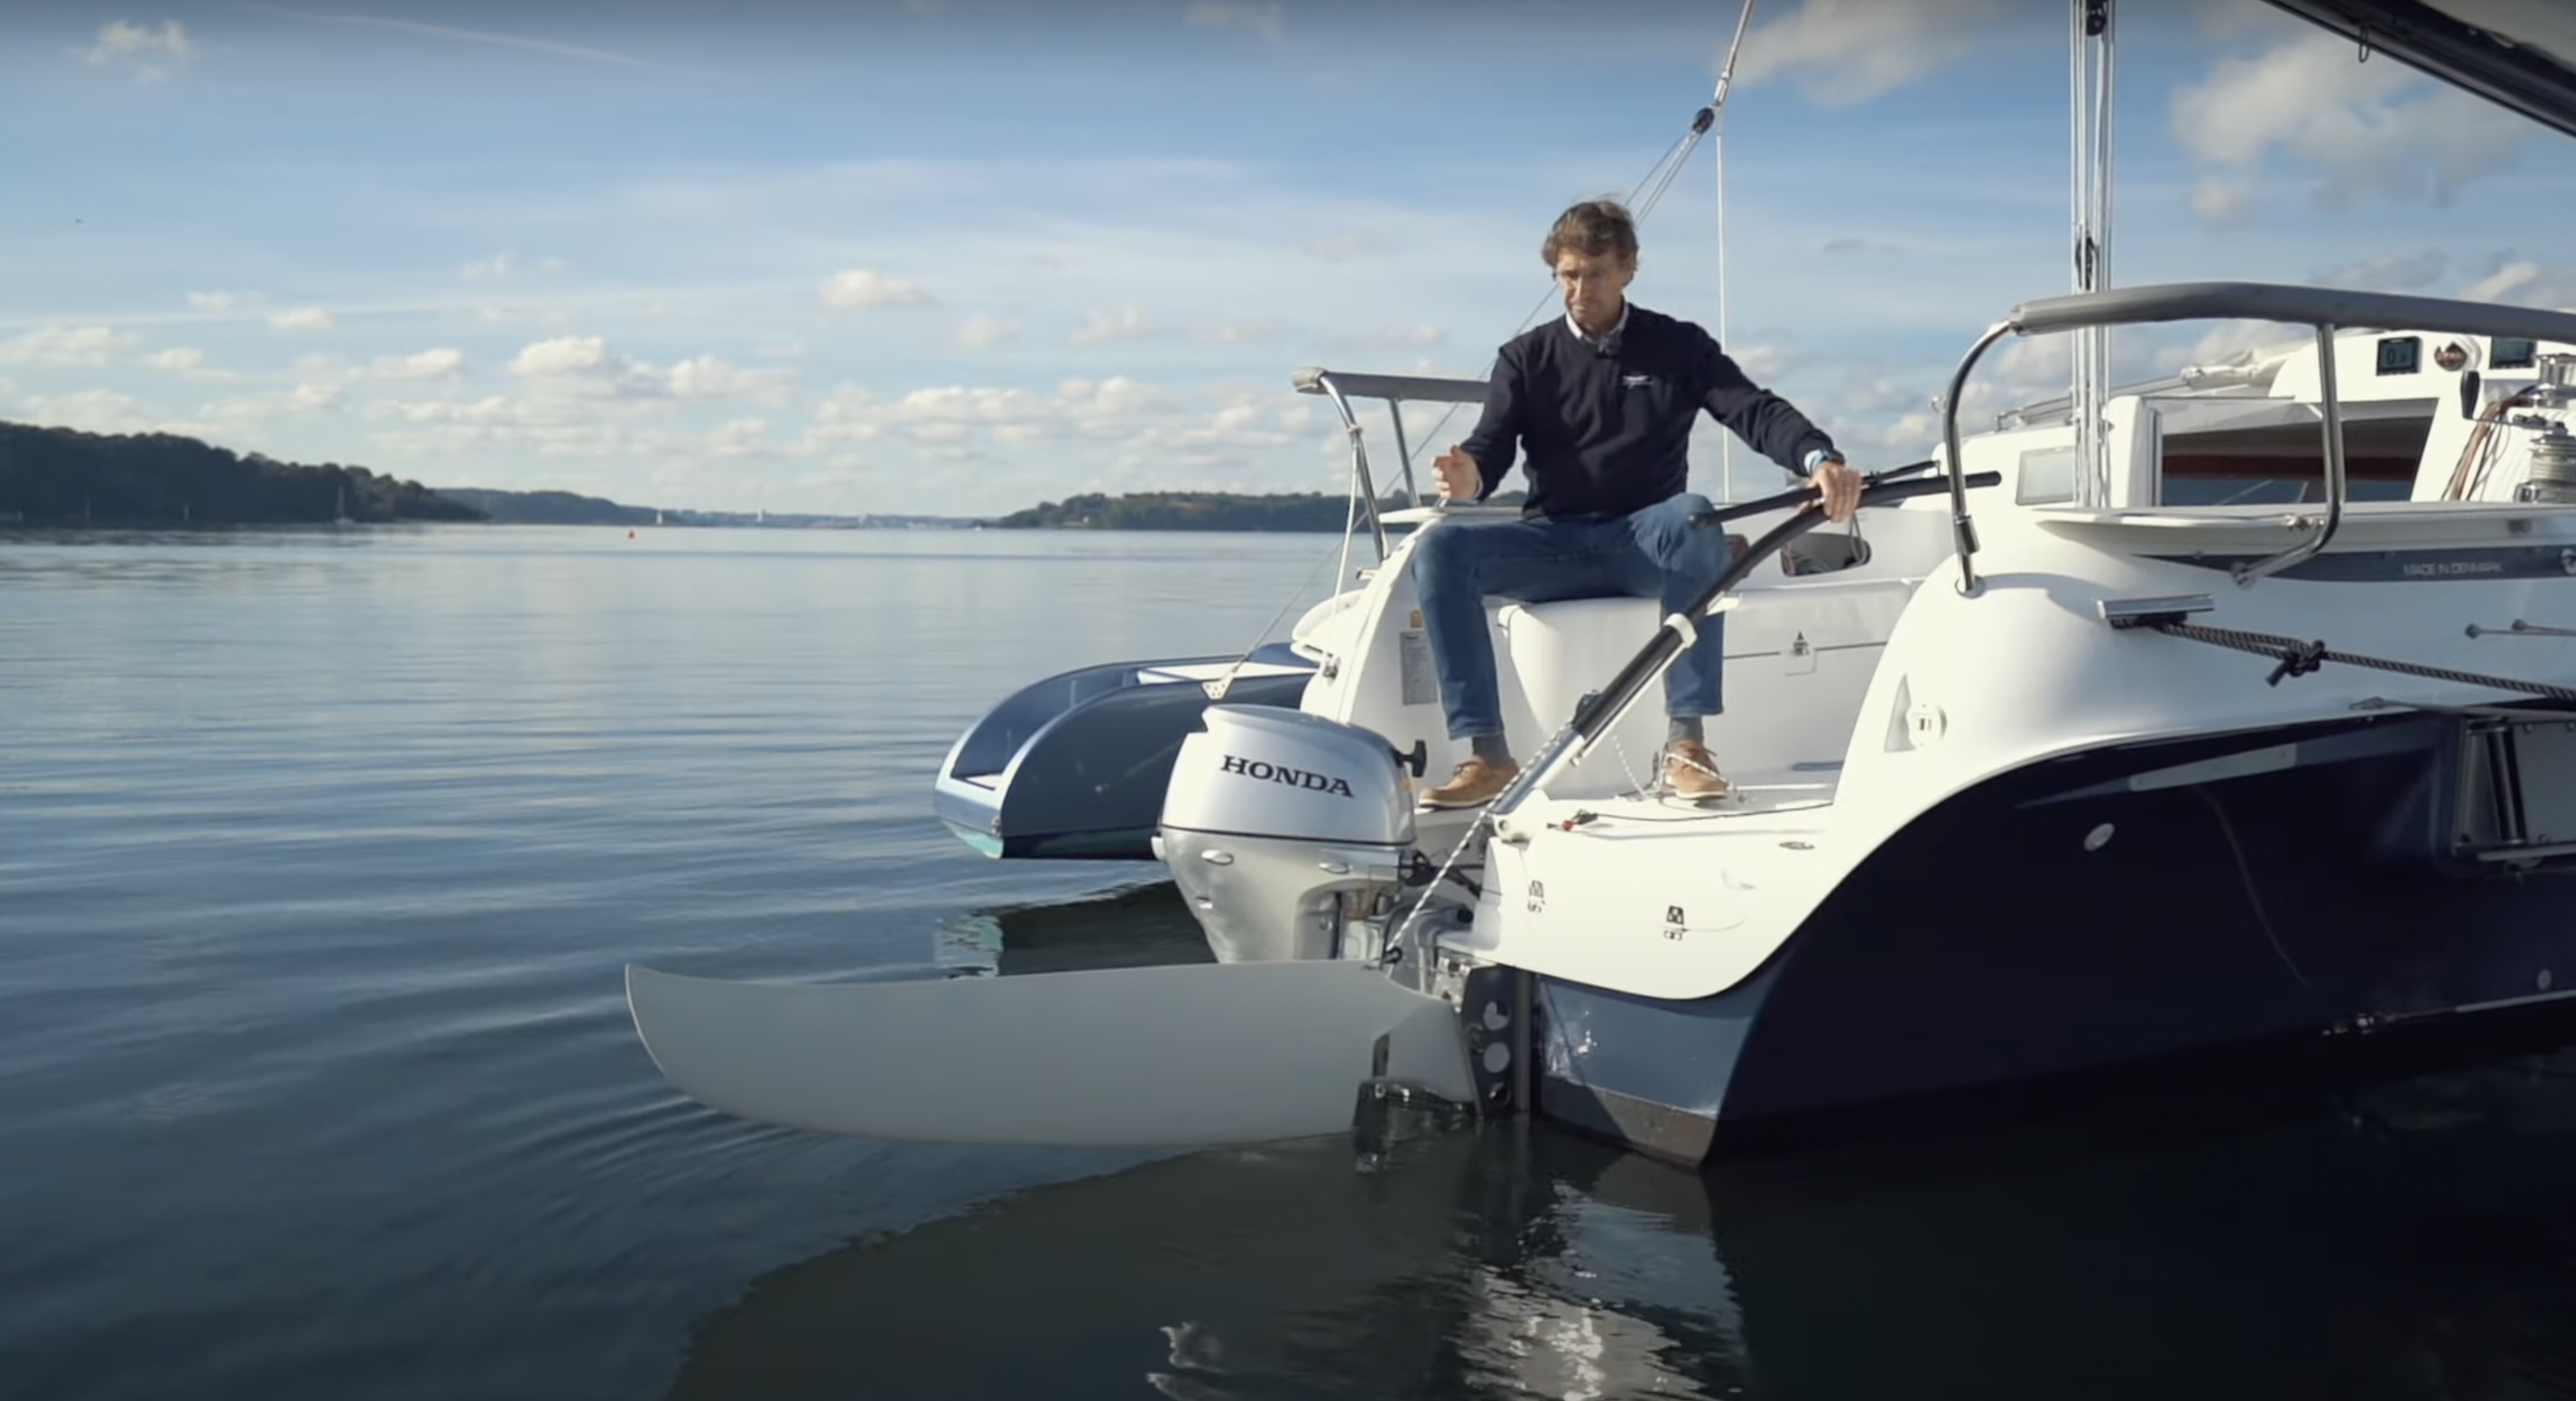 Dragonfly Trimaran Boat Functions – Rudder, Outboard Motor and Centreboard Systems